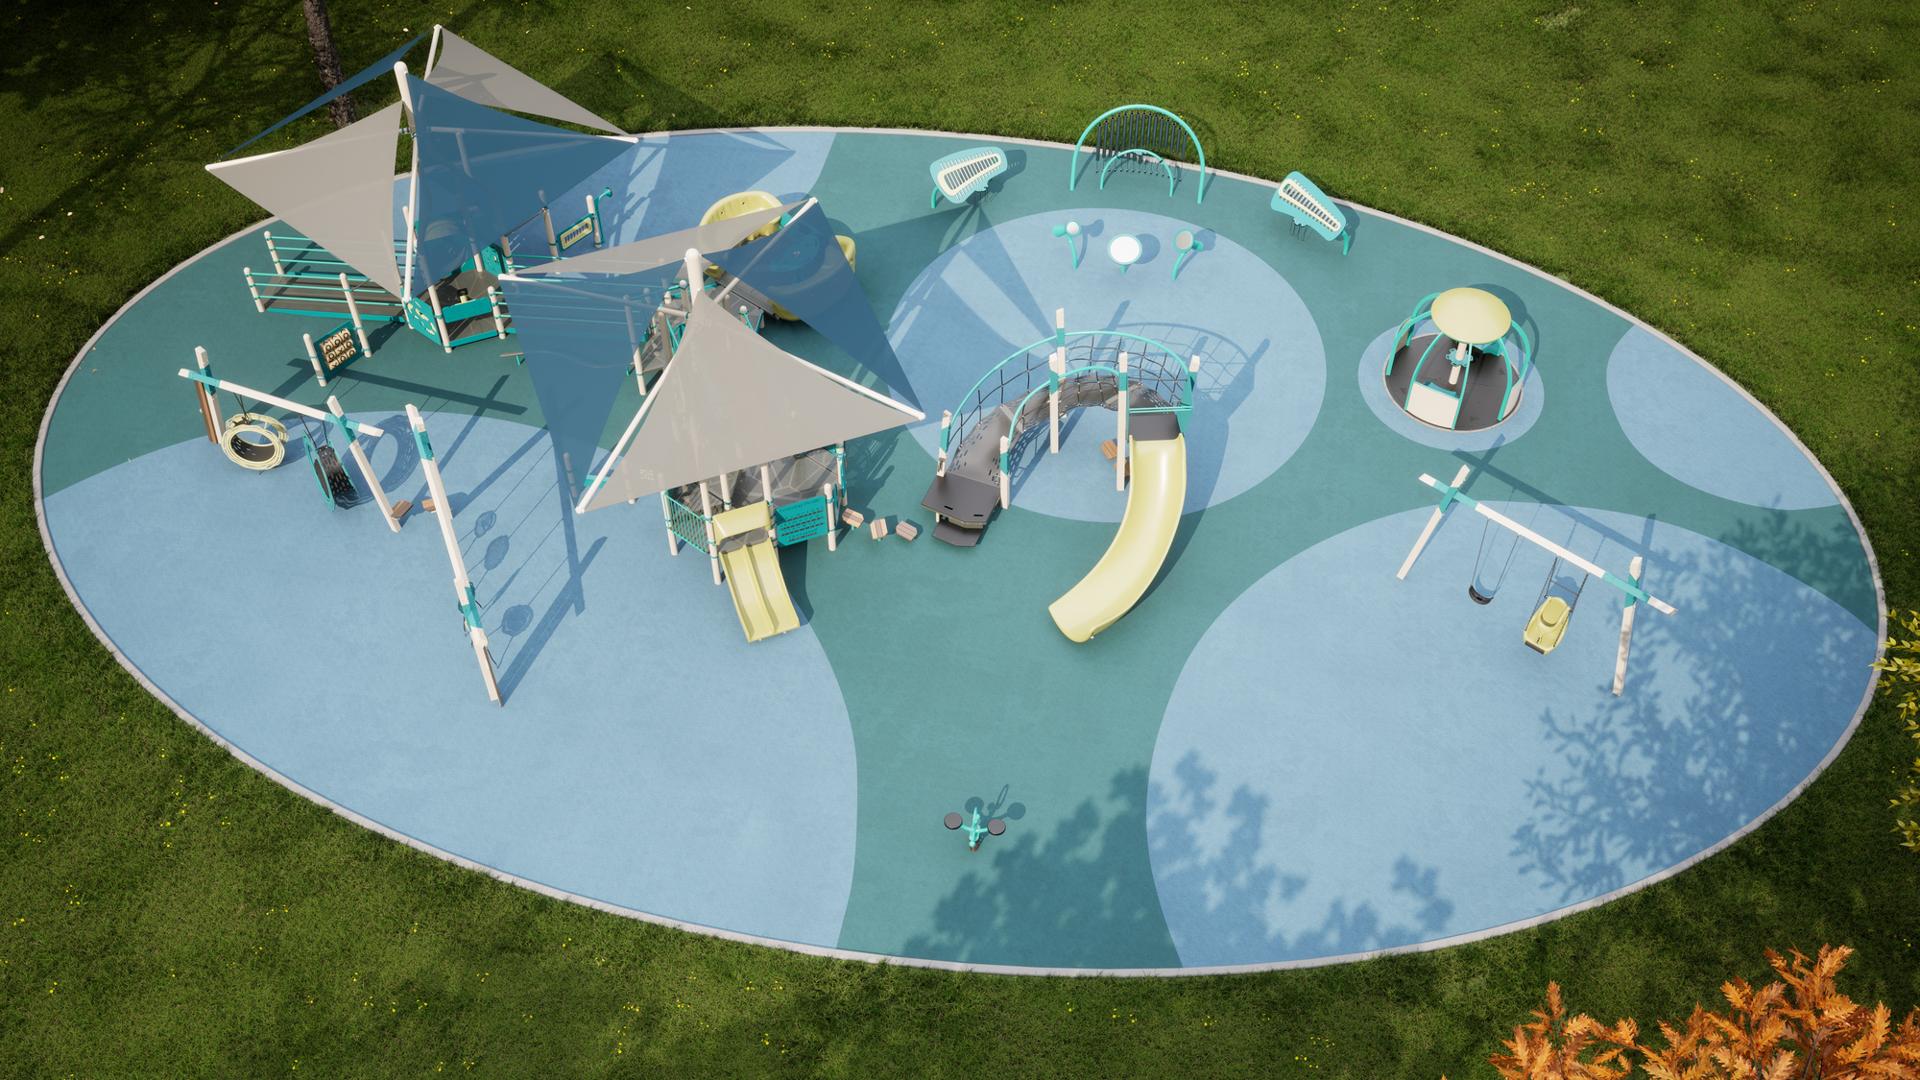 Animated rendering with a full elevated view of an oval shaped play area with modern designed play structures, swing sets, and other play activities. Two of the larger play structures are connected by accessible ramps and bridges and overhead shade systems.